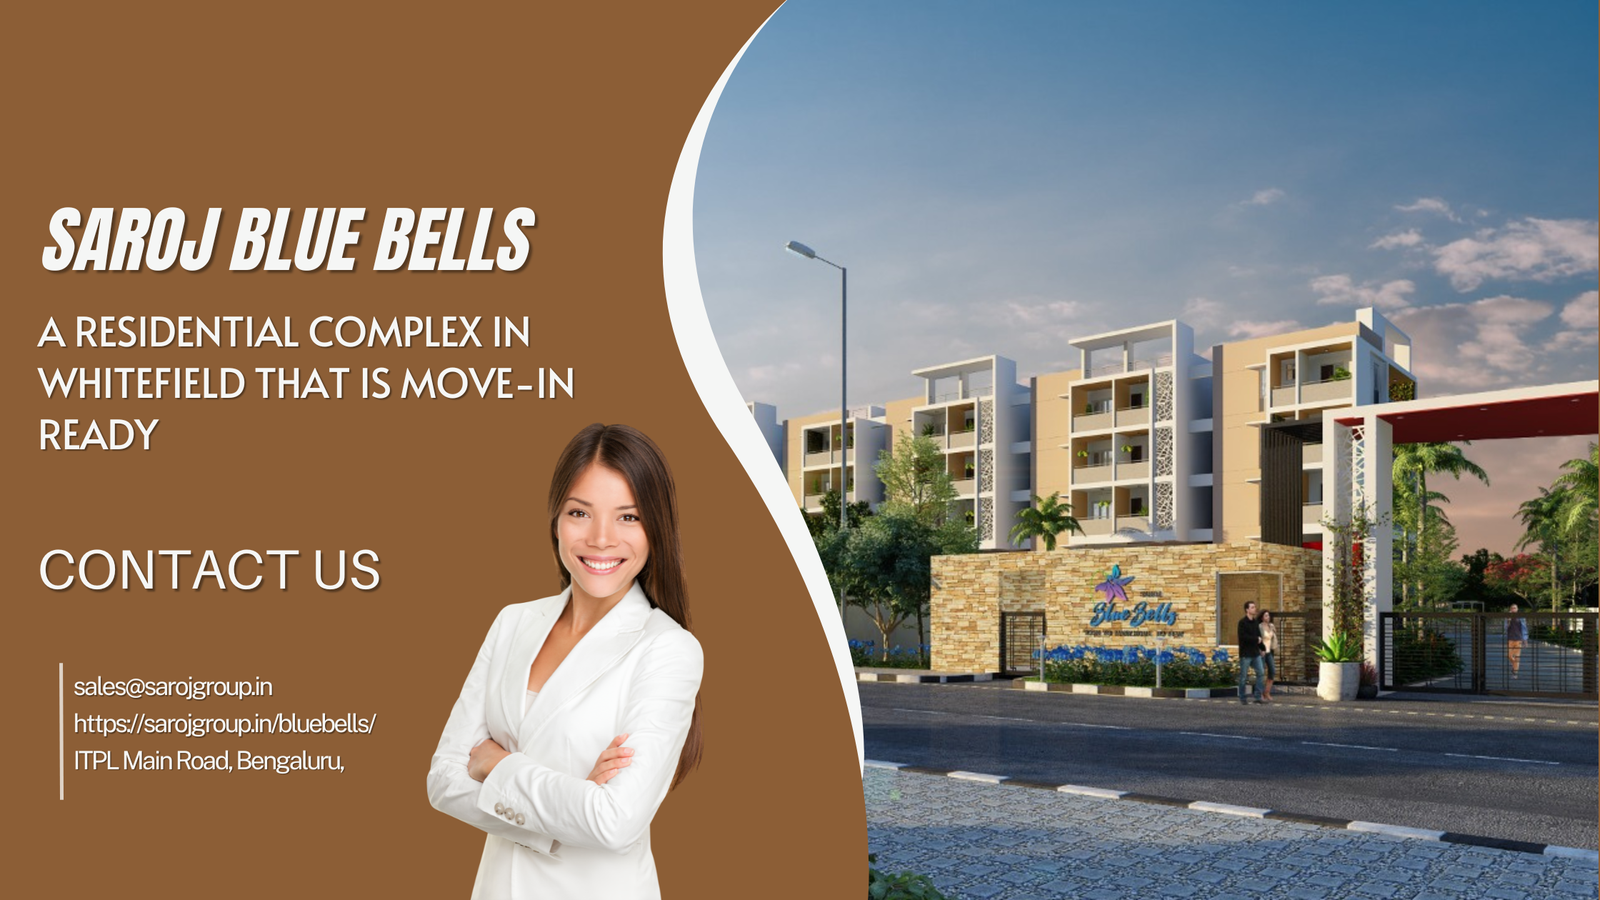 Saroj Blue Bells: A Residential Complex in Whitefield that is Move-In Ready